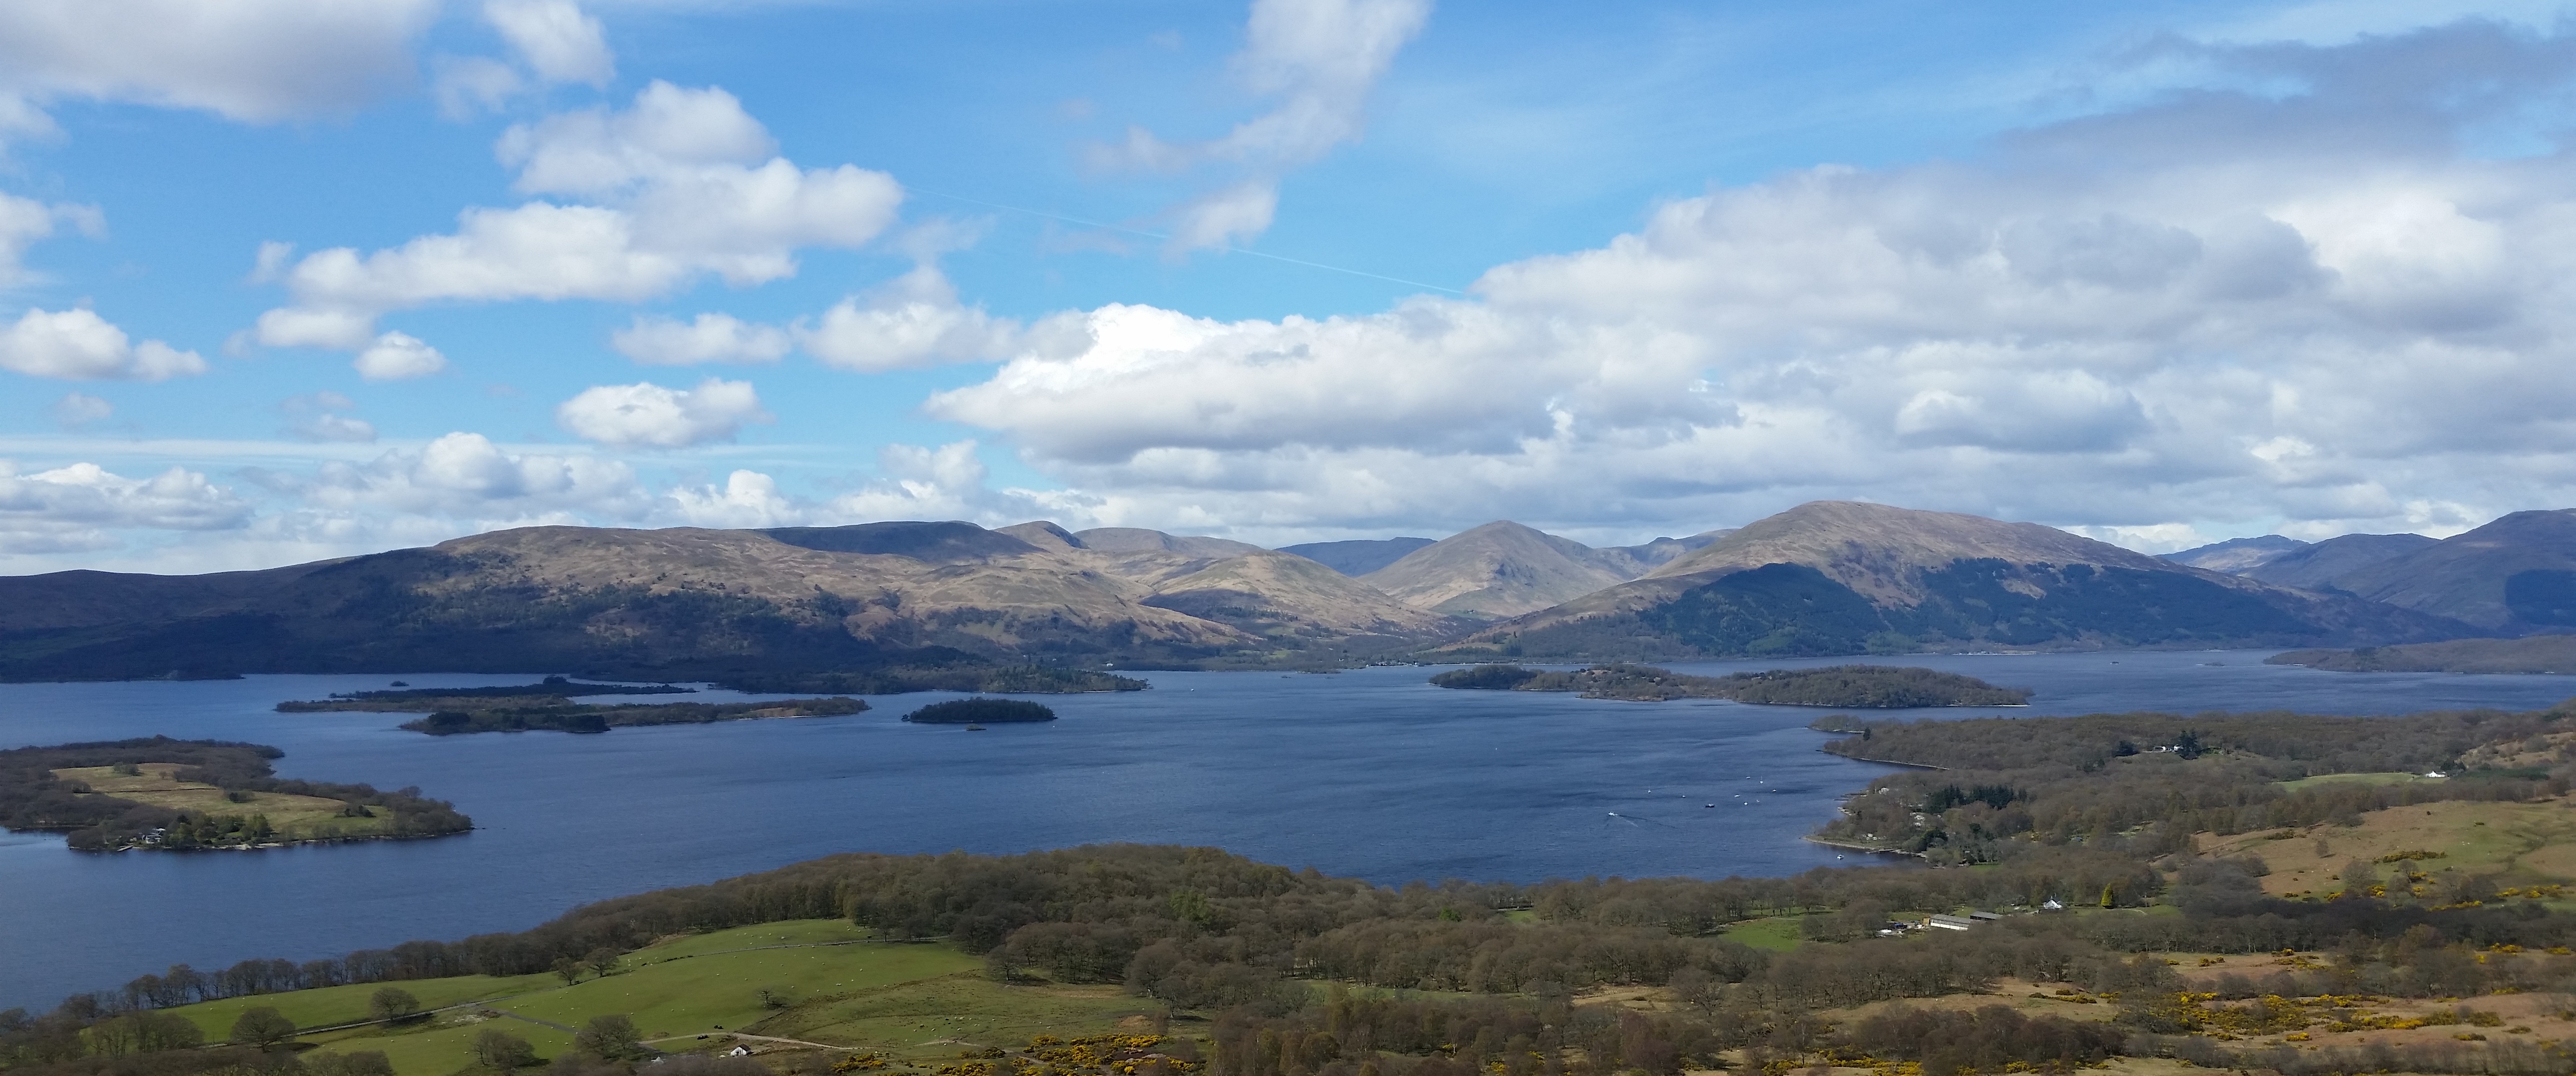 View of Loch Lomond from Conic Hill, Scotland